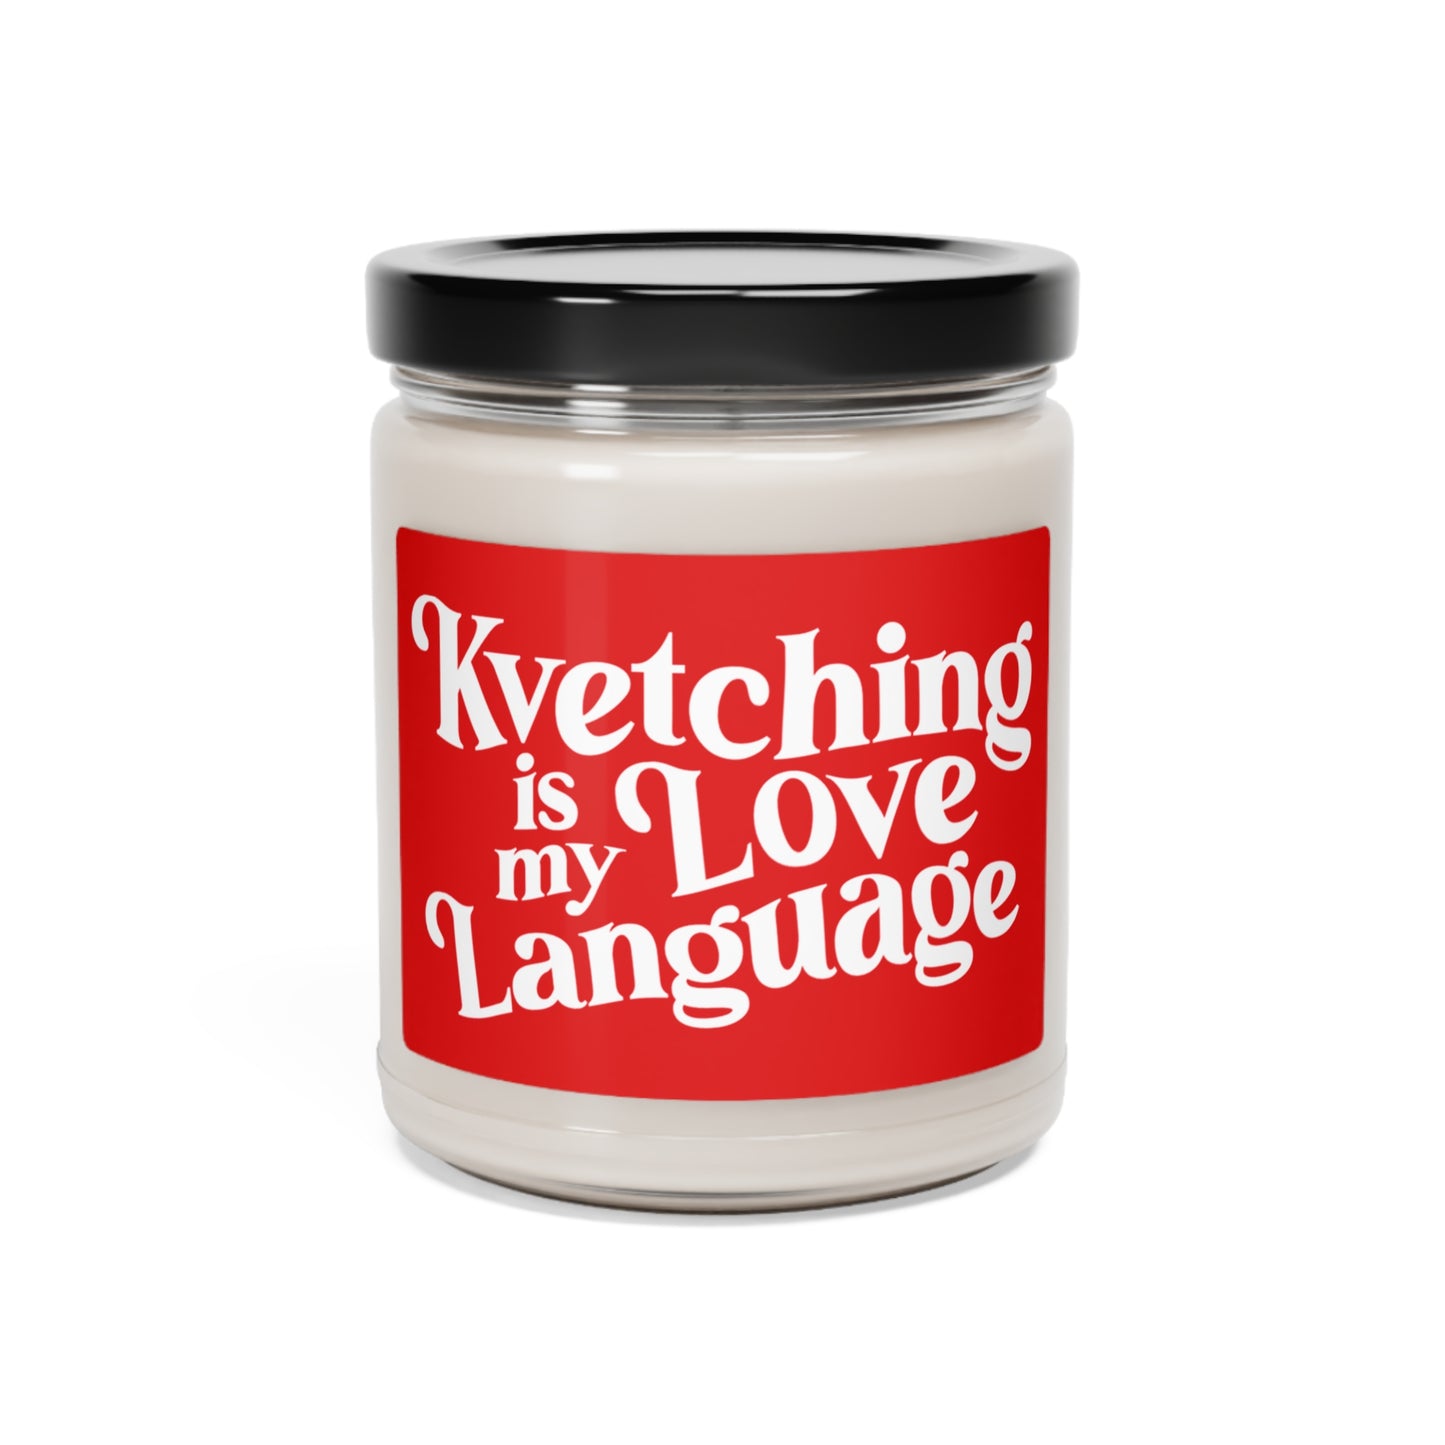 Kvetching is my Love Language Candle